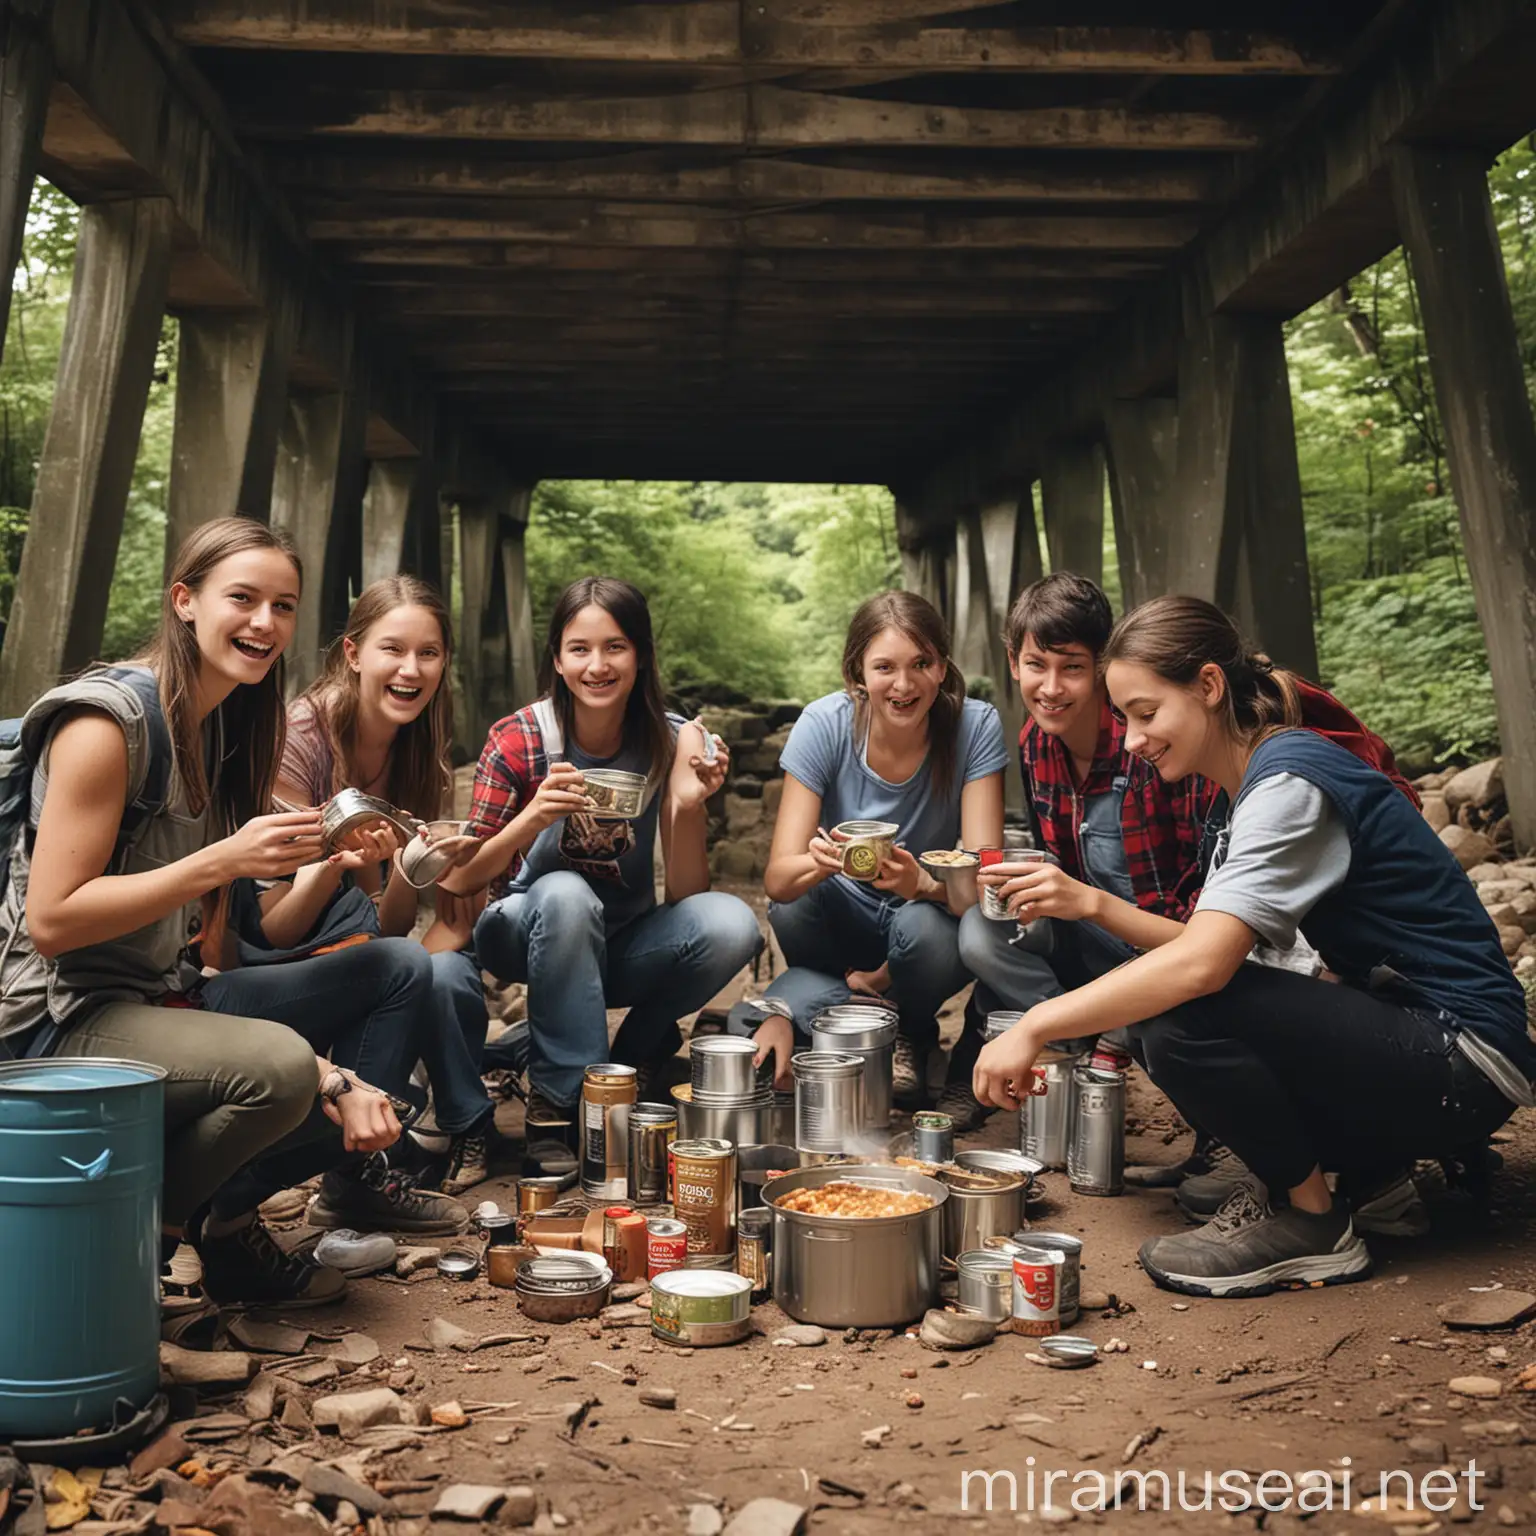 Outdoor Camping Scene Friends Cooking Canned Food Under a Bridge